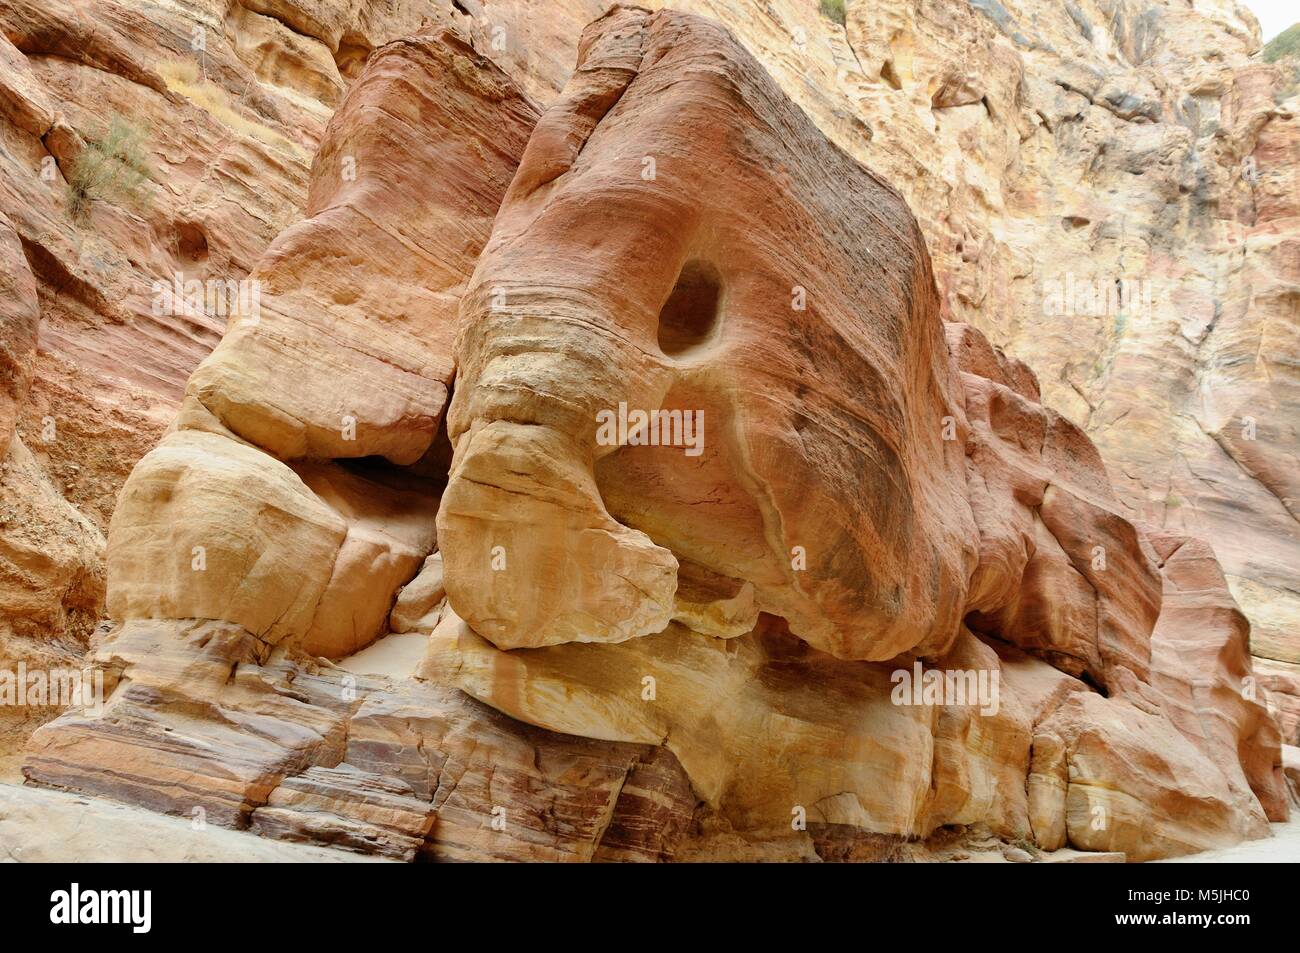 Two elephants are cut out from sandstone by erosion, Petra, Jordan Stock Photo